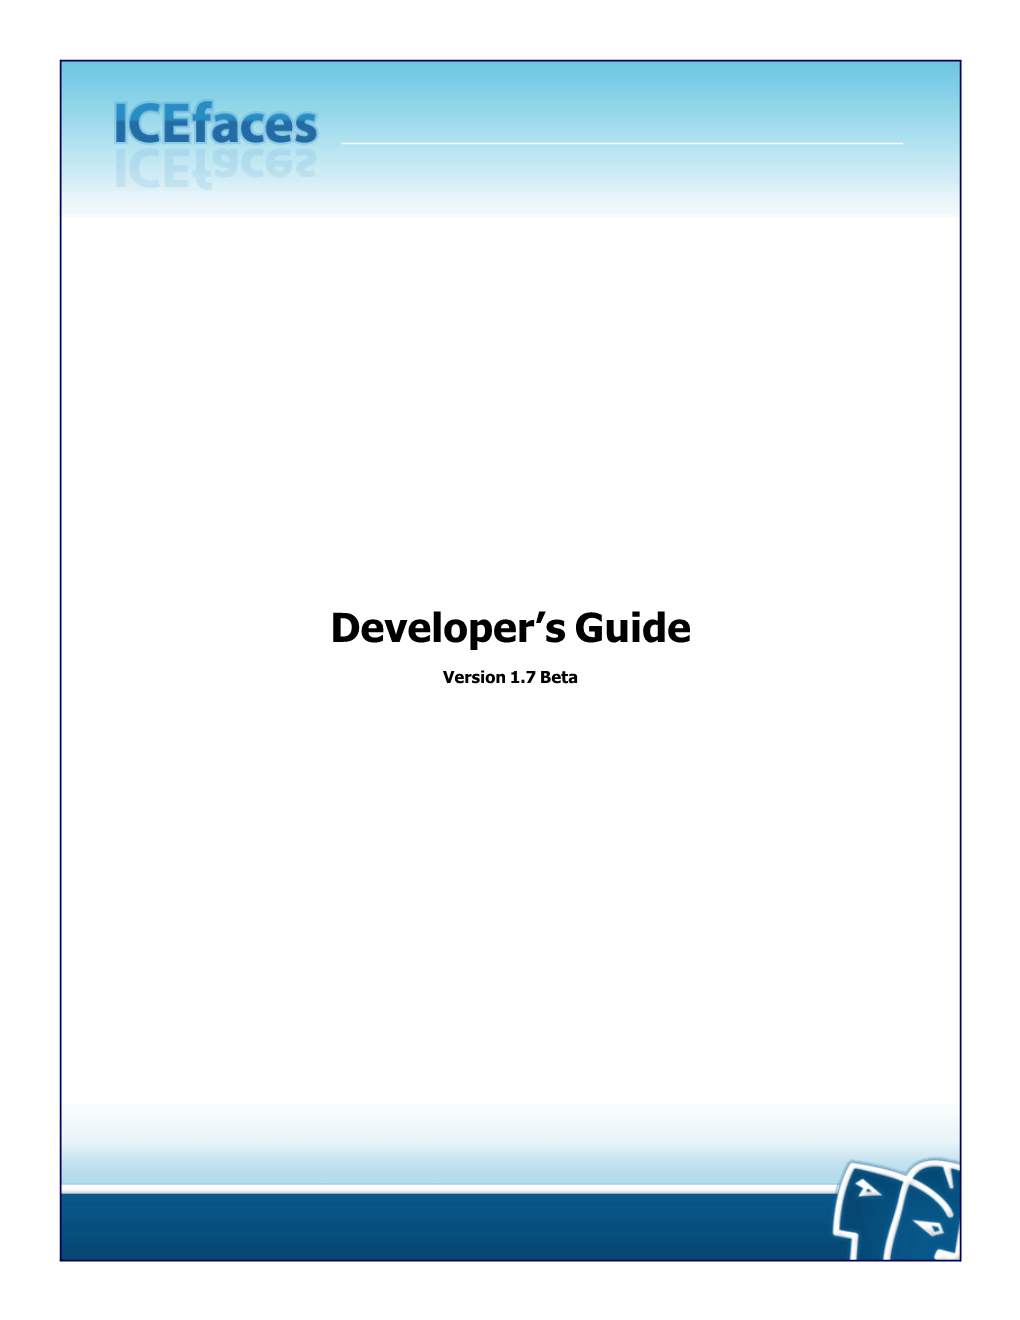 Icefaces Developer's Guide, Community Edition